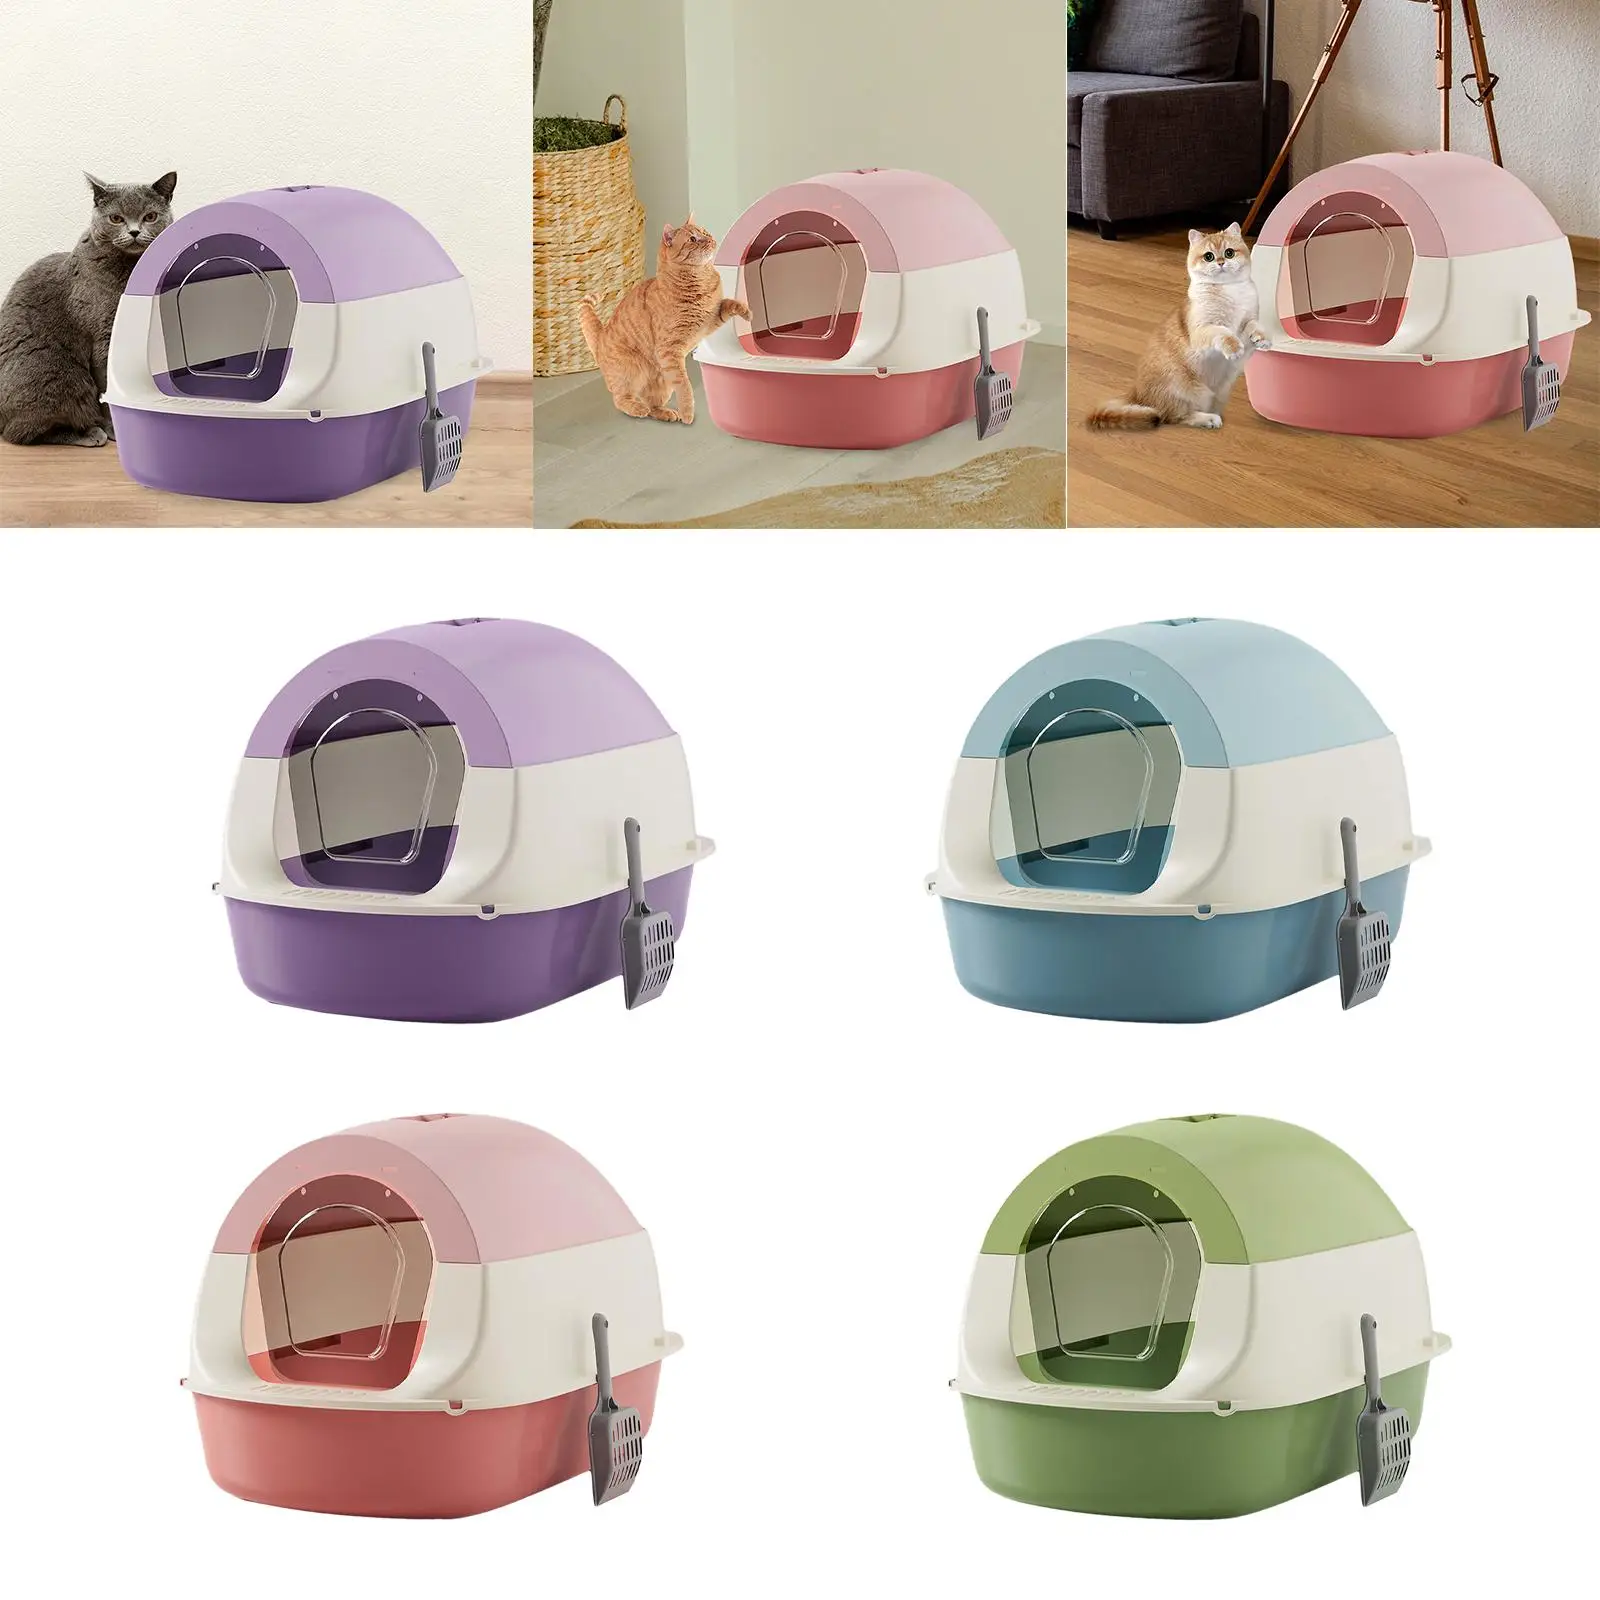 Hooded Cat Litter Box Anti Splashing Easy to Clean for Indoor Cats Removable Pet Litter Box with Lid Hooded Kitty Litter Tray